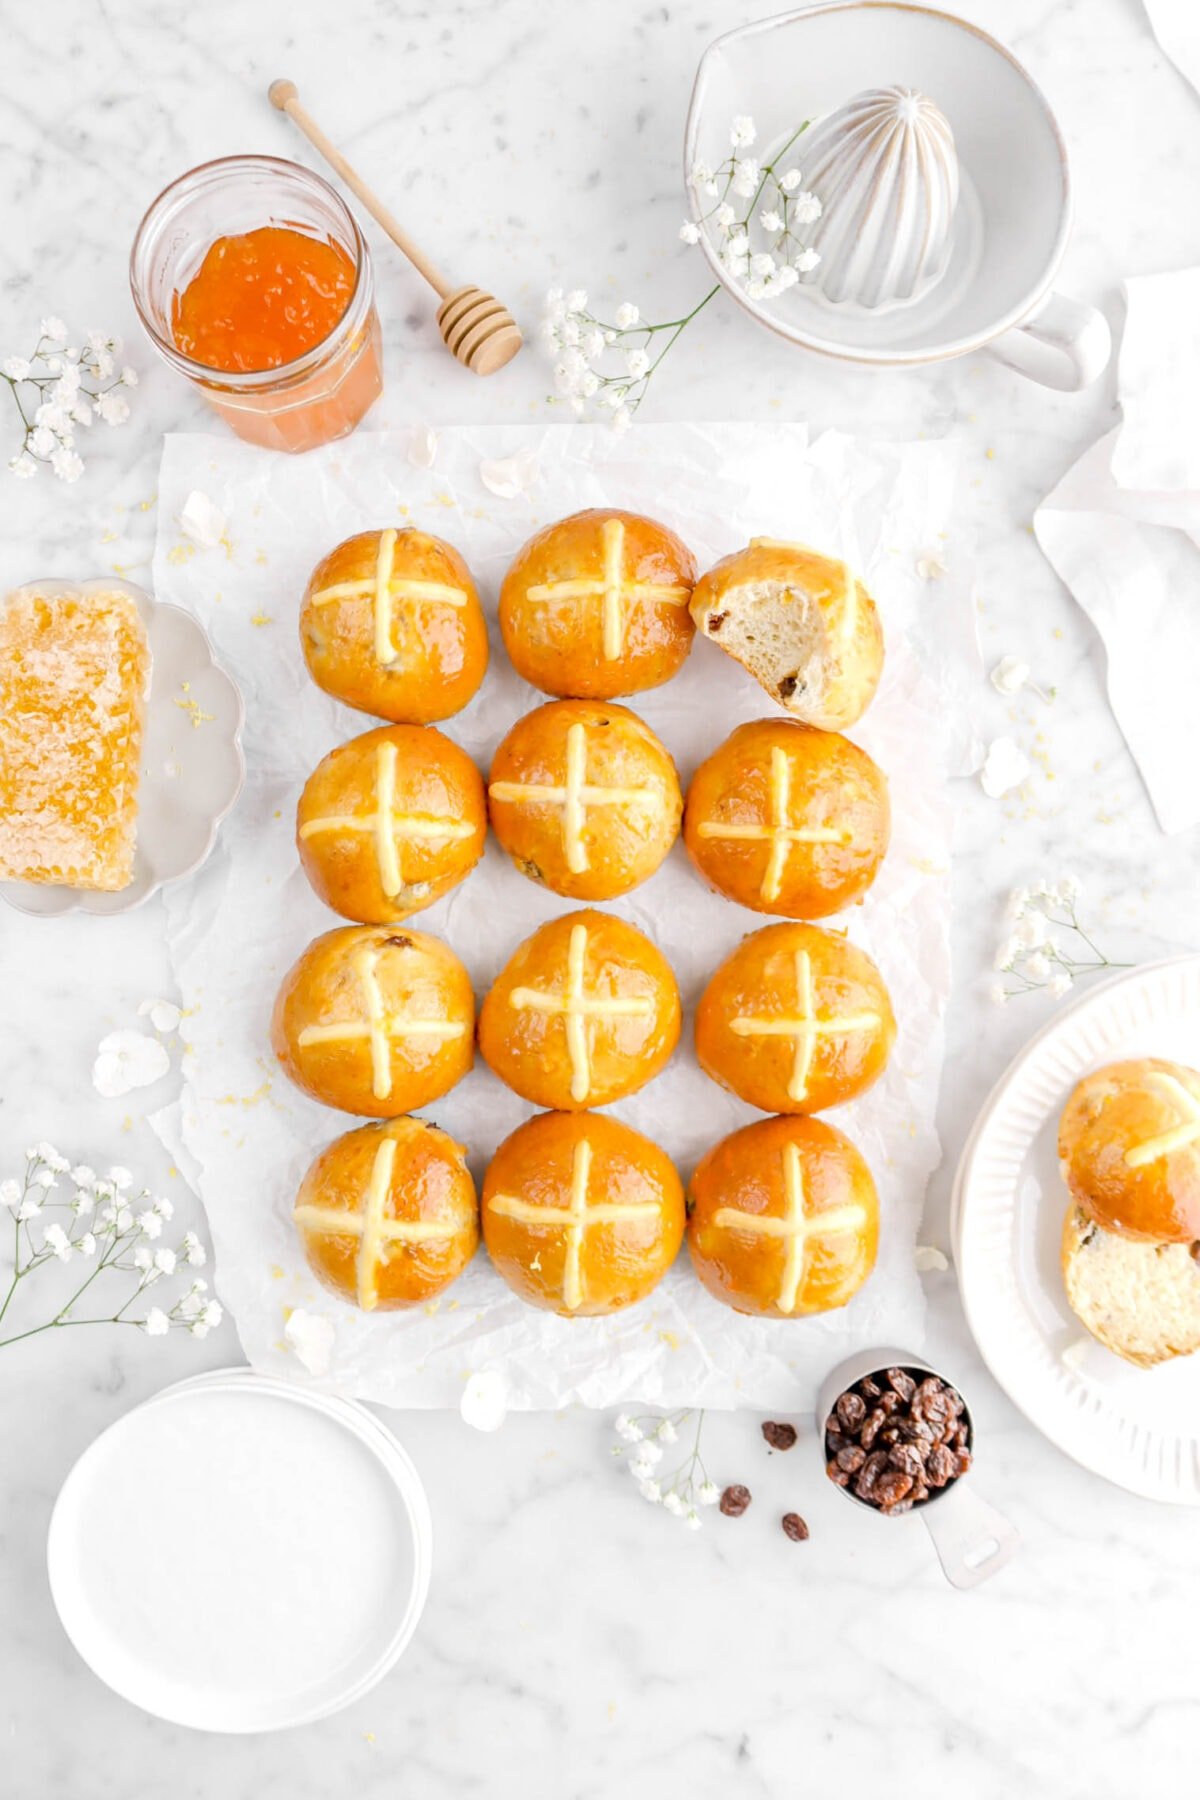 overhead of twelve hot cross buns on parchment paper with bite taken out of top right bun with white flowers around, a homey comb, jar of jam, citrus juicer, and measuring cup full of raisins